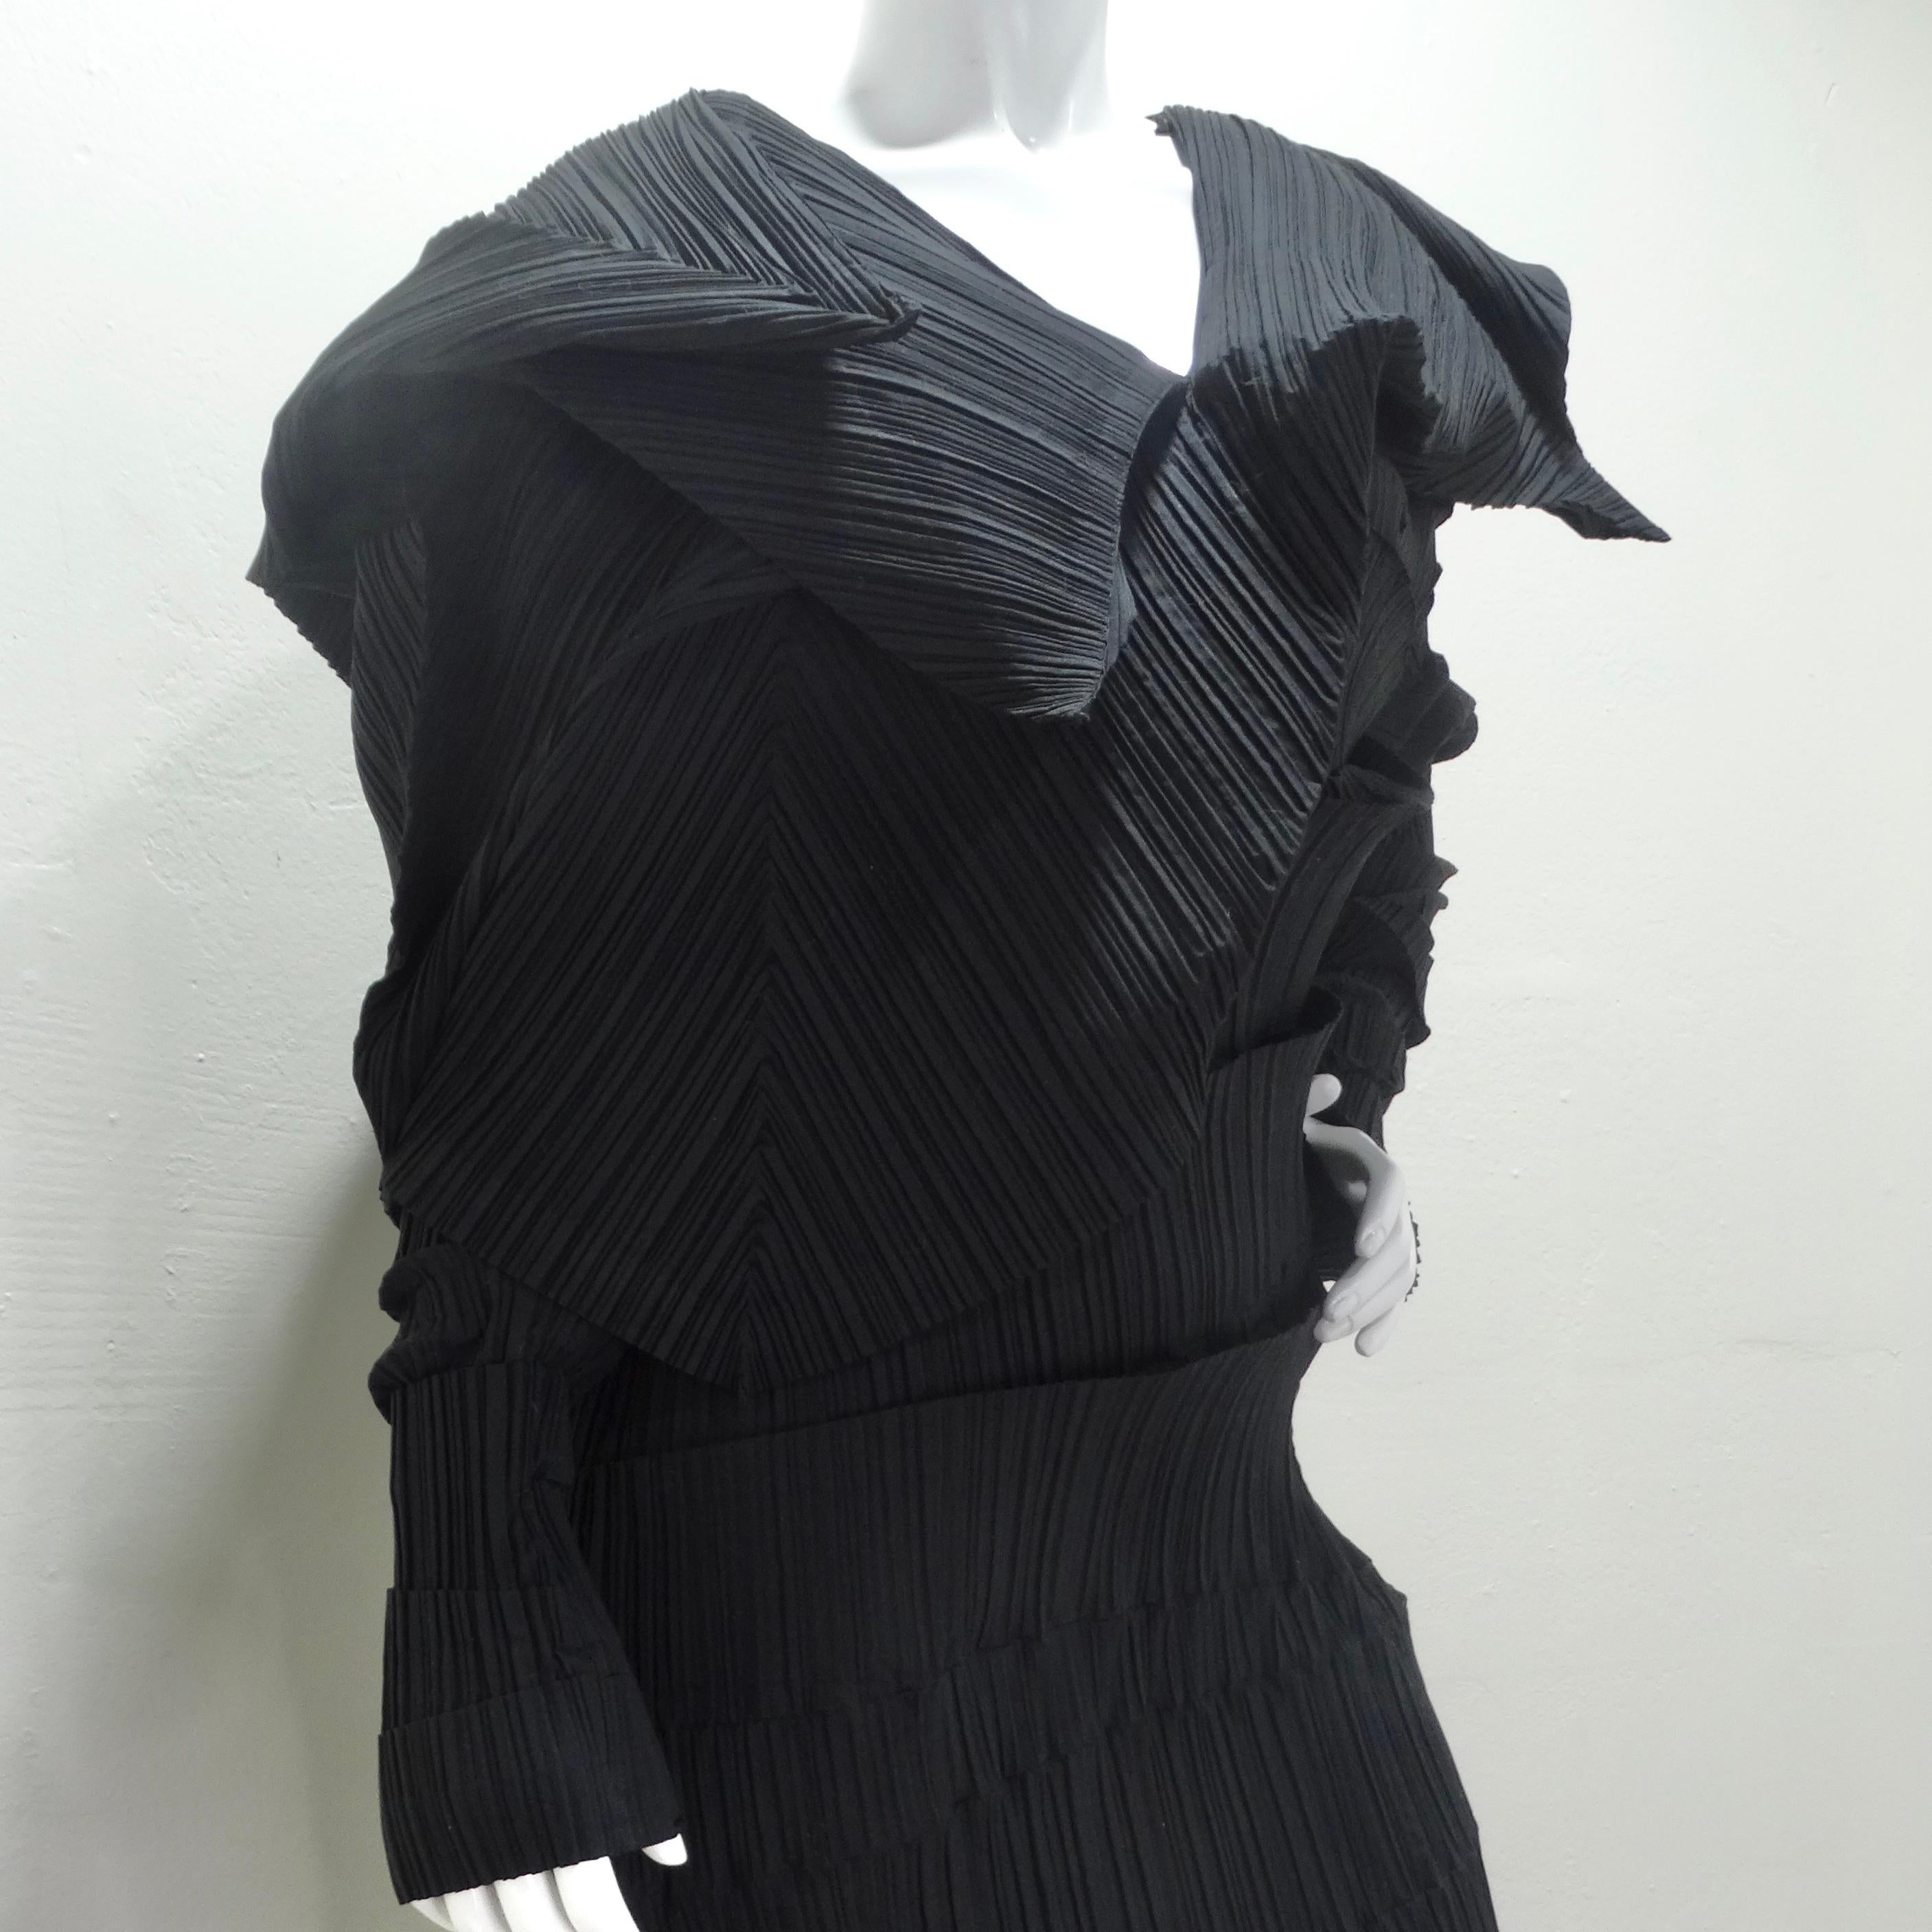 Women's or Men's Issey Miyake 1989 Reverse Pleats Black Sculptural Museum Quality Dress For Sale